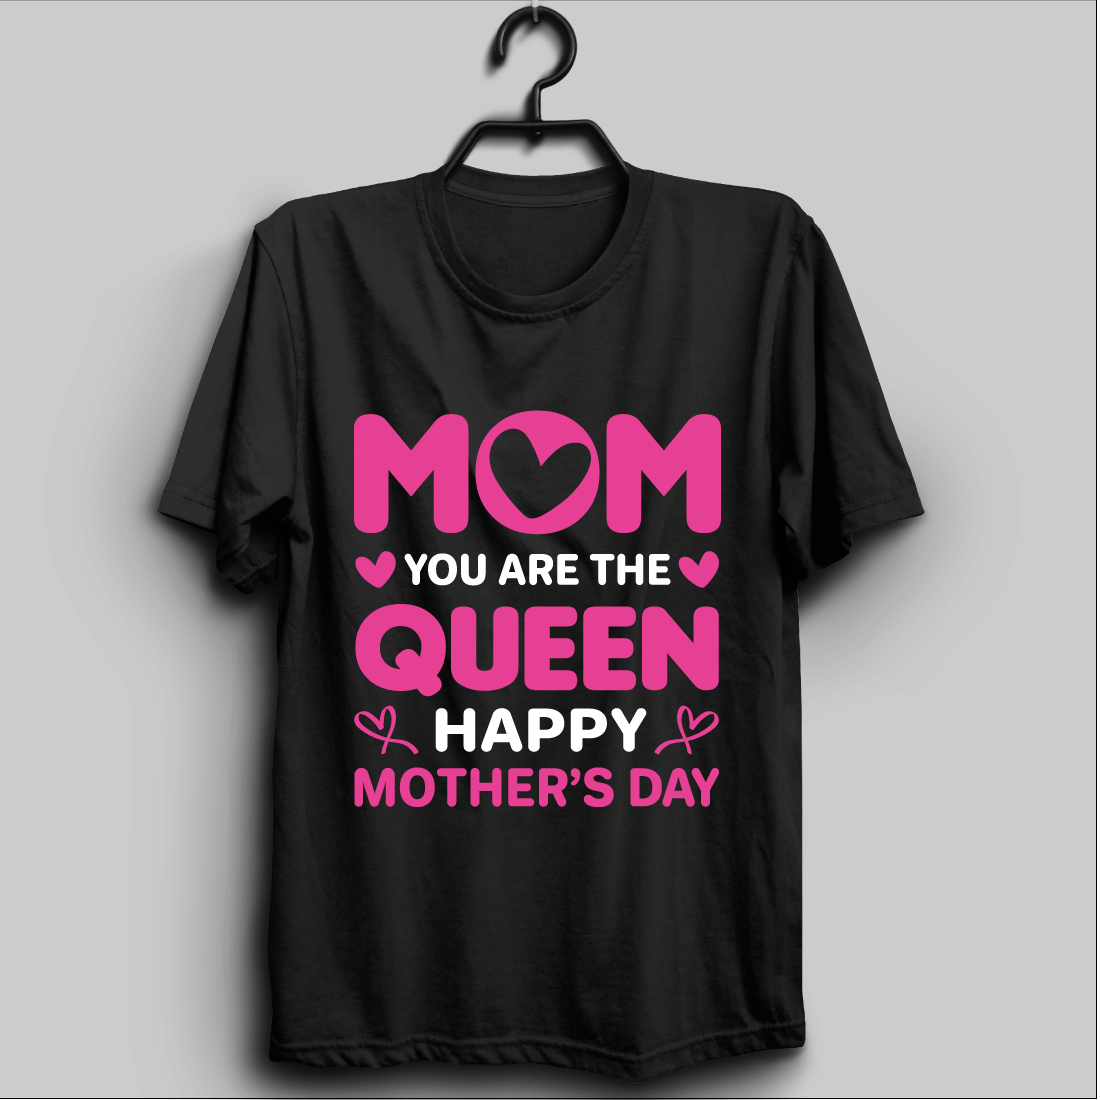 mothers day t shirt design 2 958